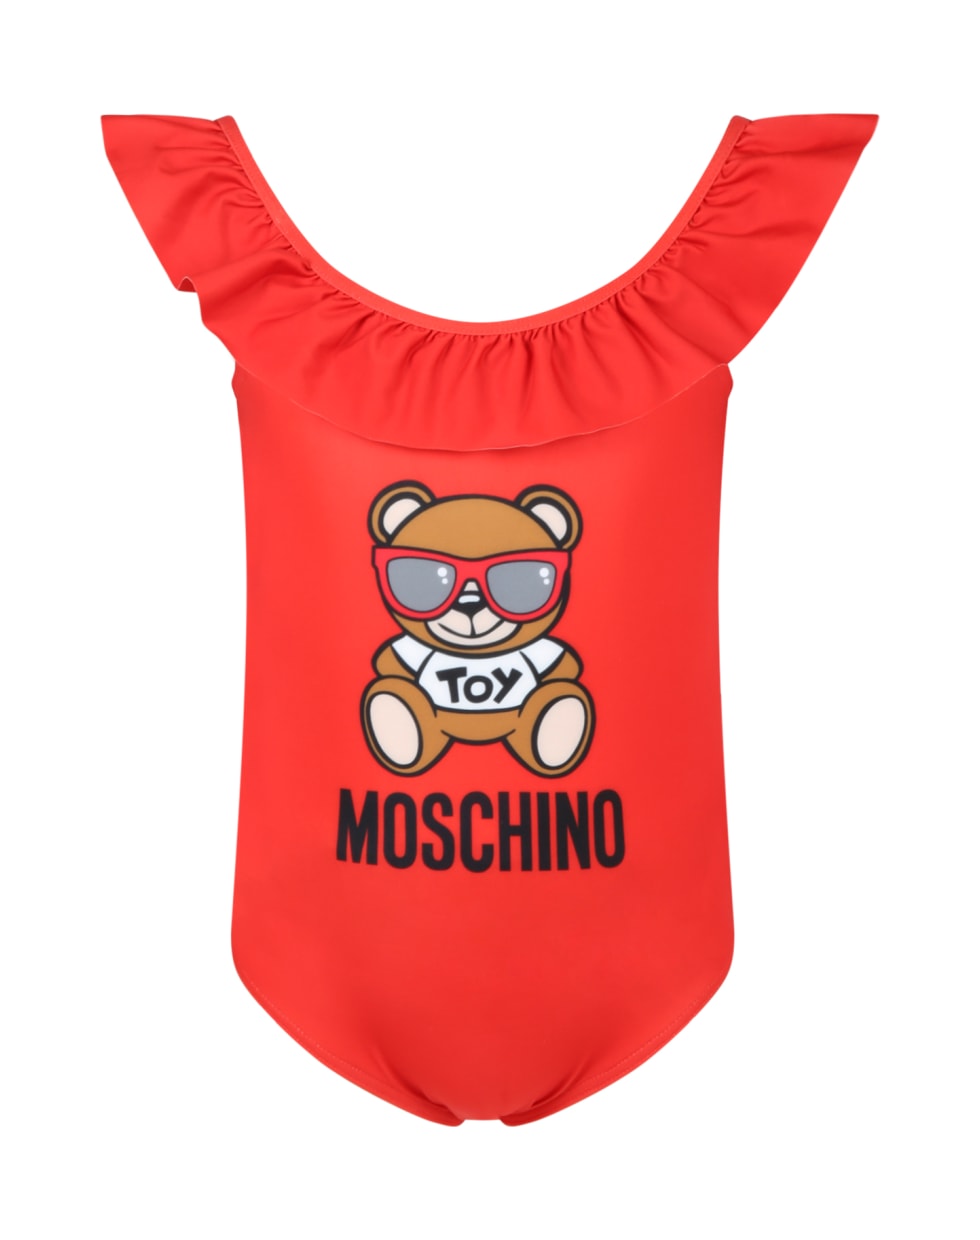 Moschino Red Swimsuit For Girl With Teddy Bear - Red